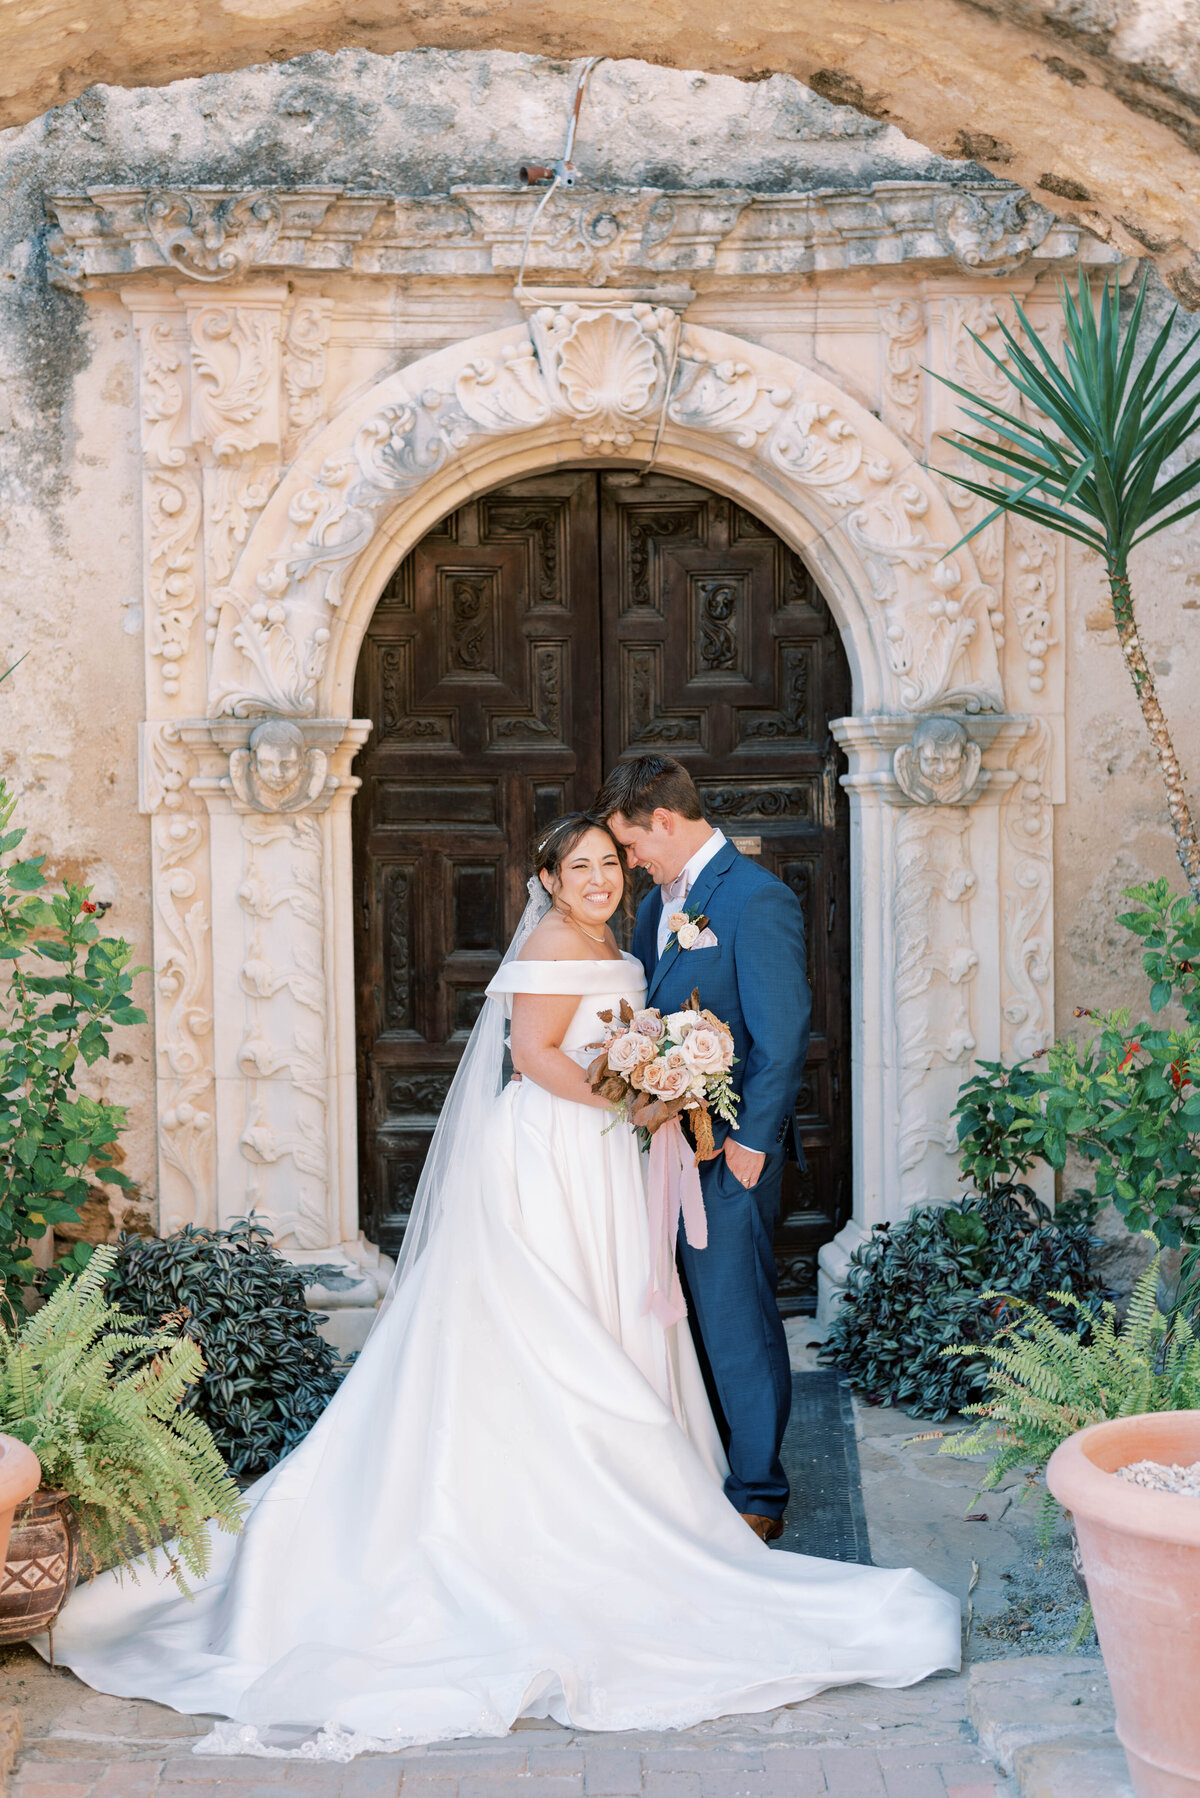 Bride and groom posing in front of a large wooden arched door